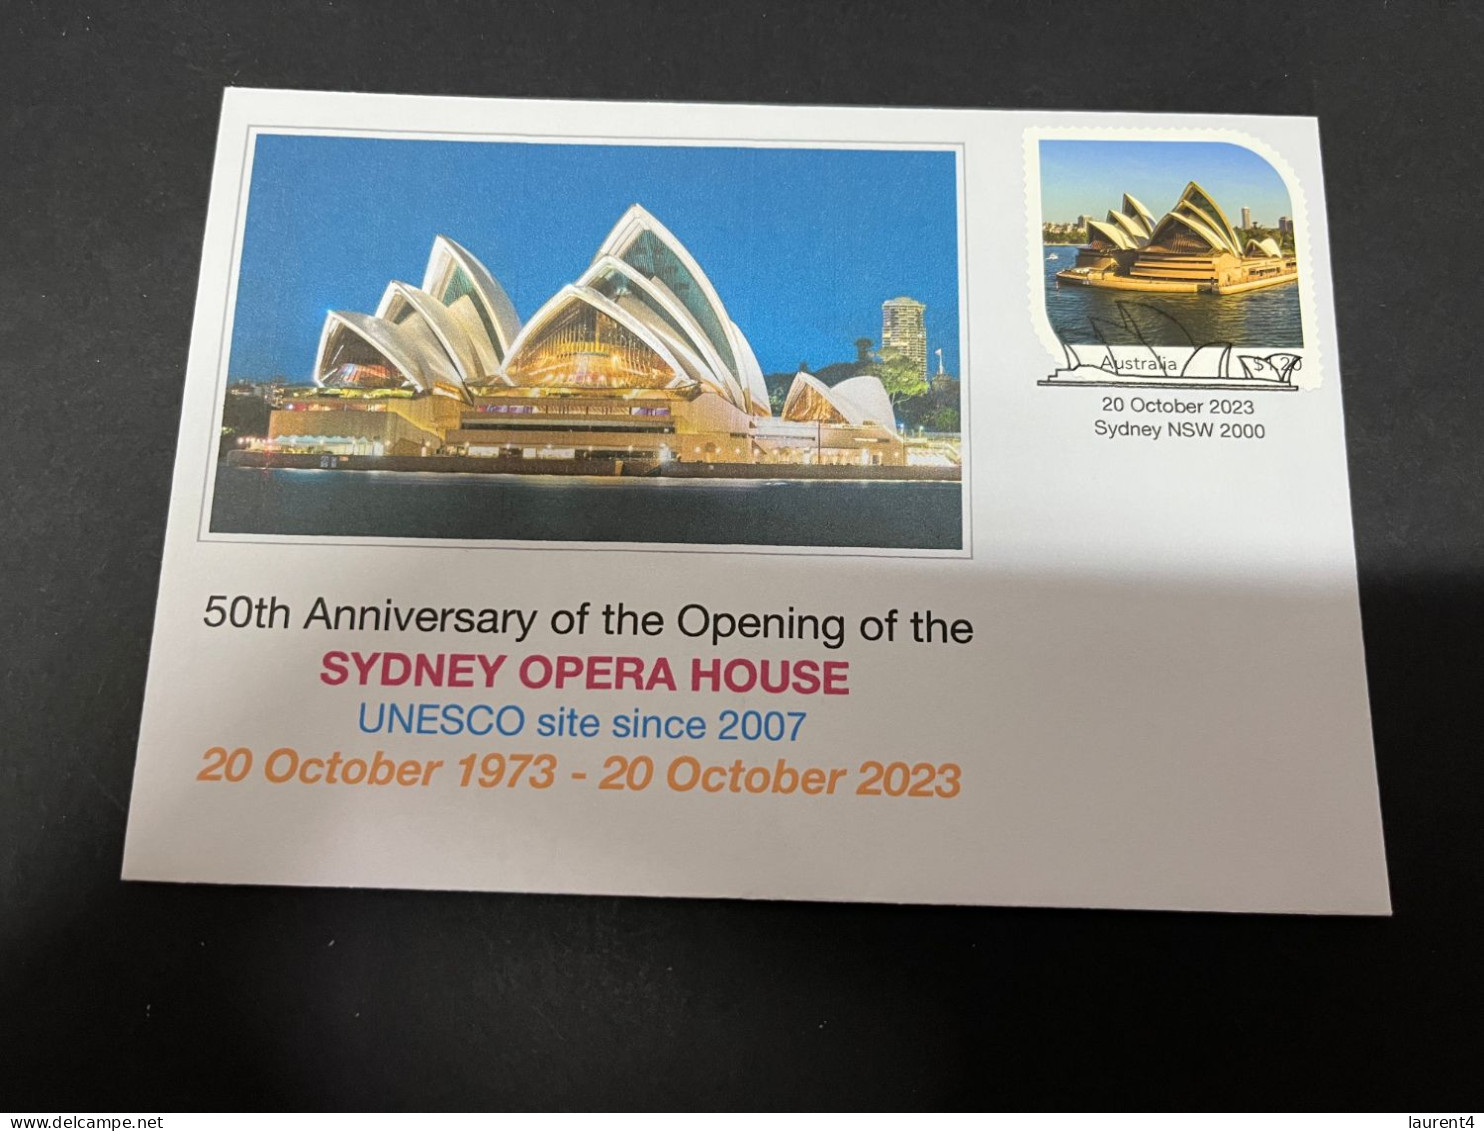 6-10-2023 (3 U 27) Sydney Opera House Celebrate 50th Anniversary (20-10-2023) 2 Covers - Covers & Documents